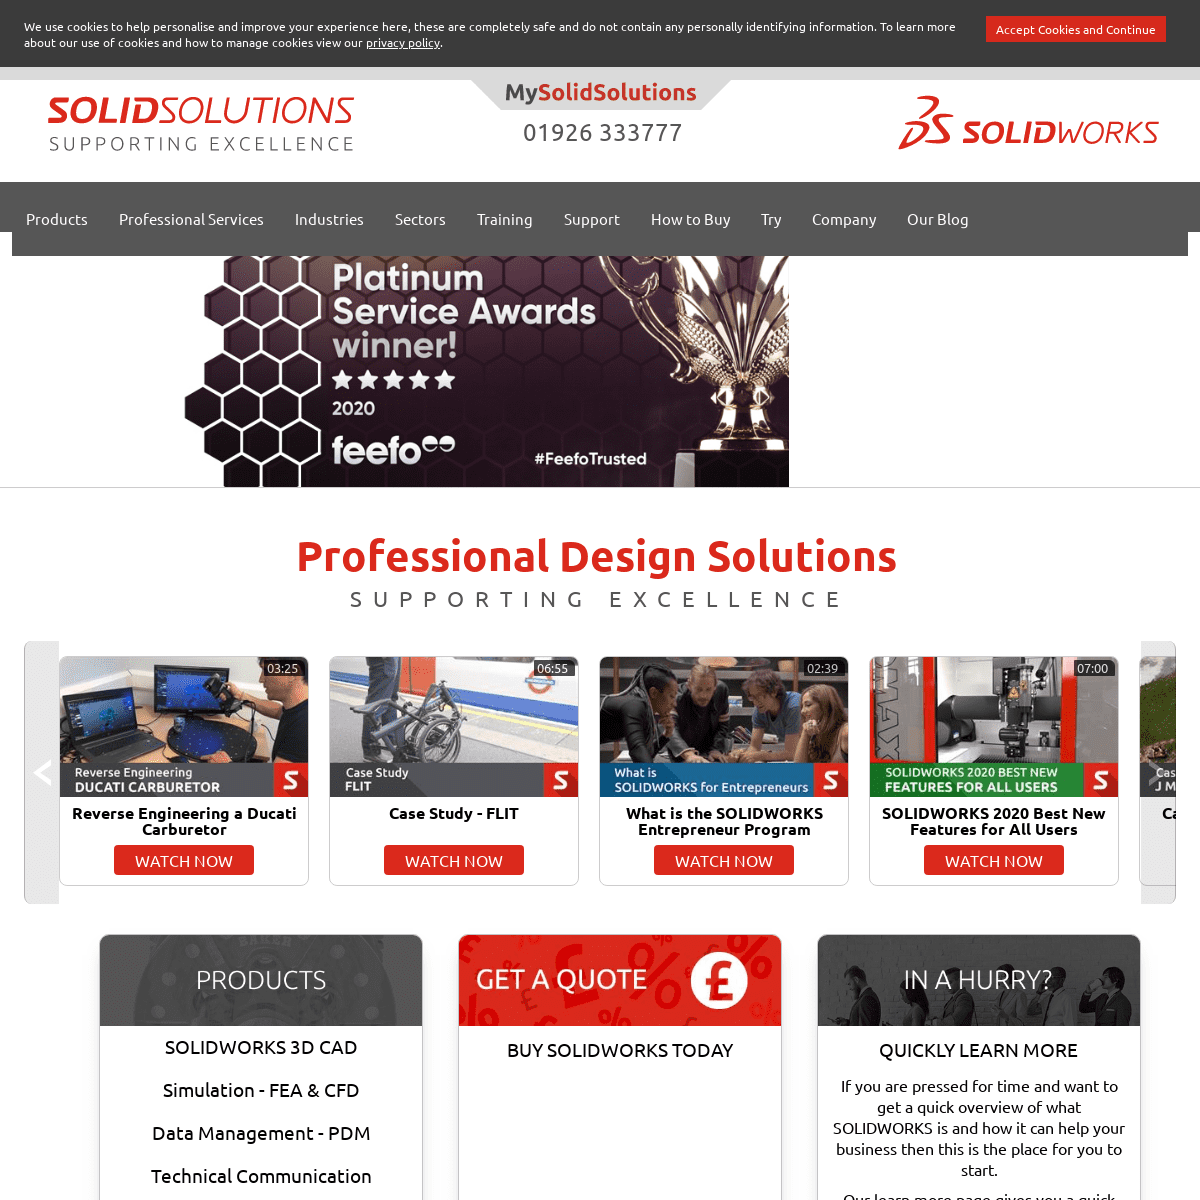 A complete backup of solidsolutions.co.uk